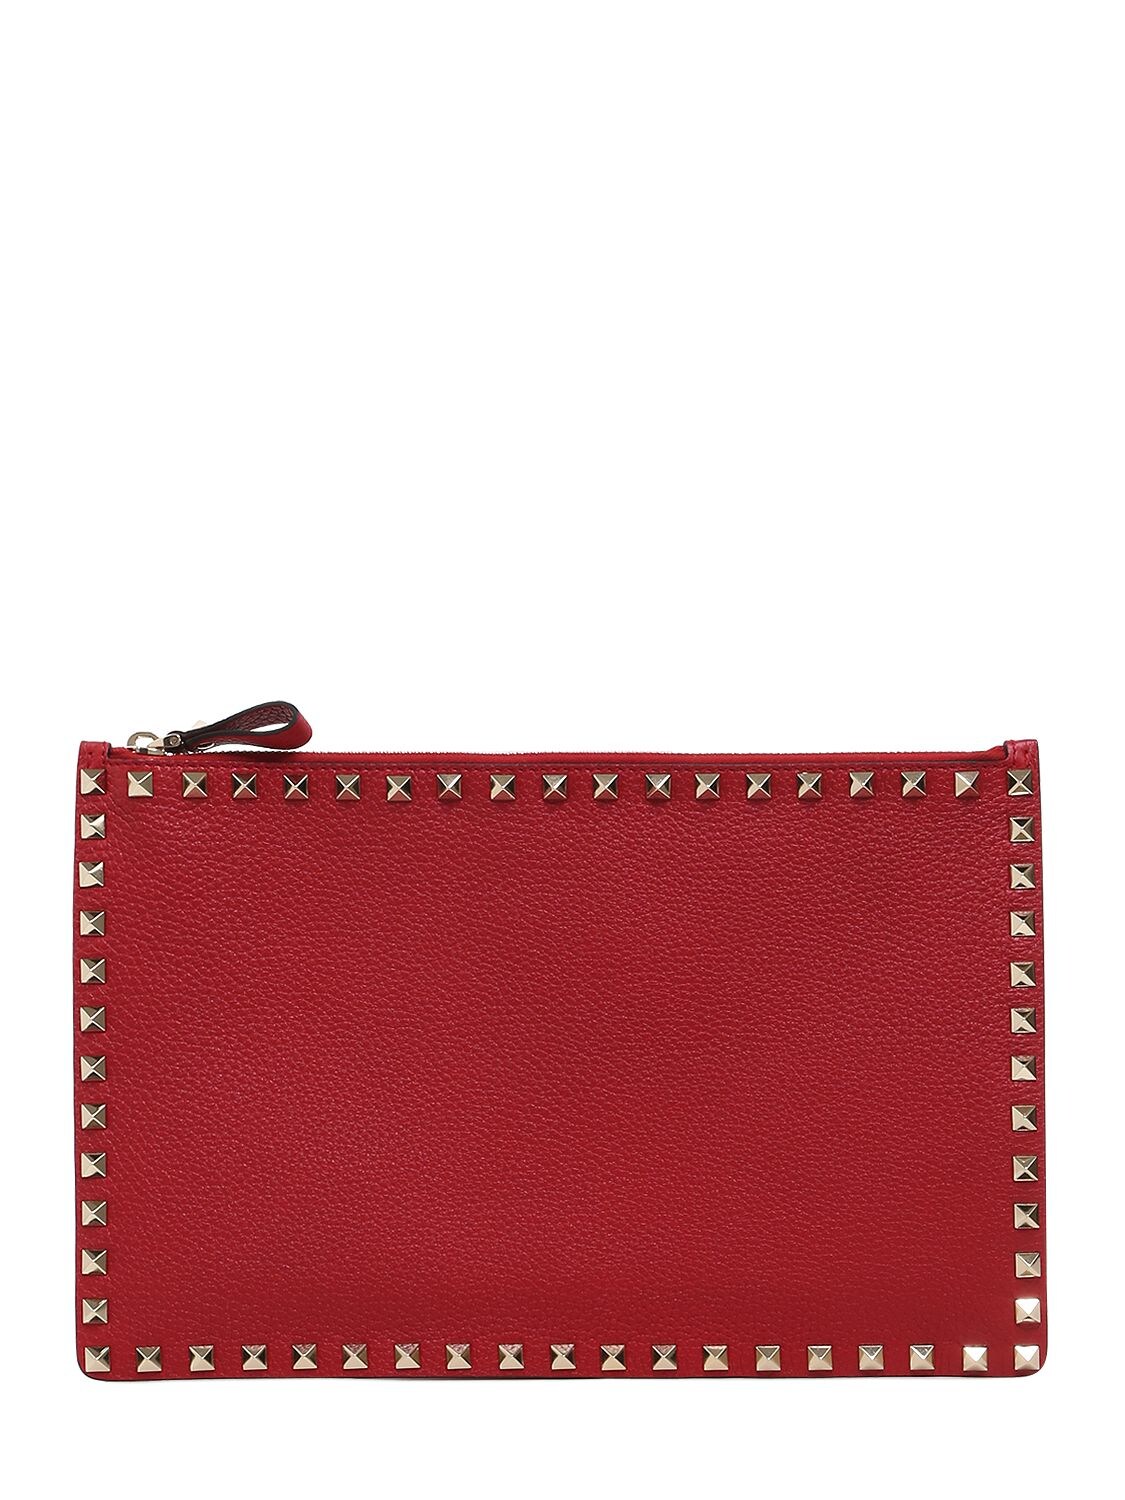 MEDIUM ROCKSTUD GRAINED LEATHER POUCH